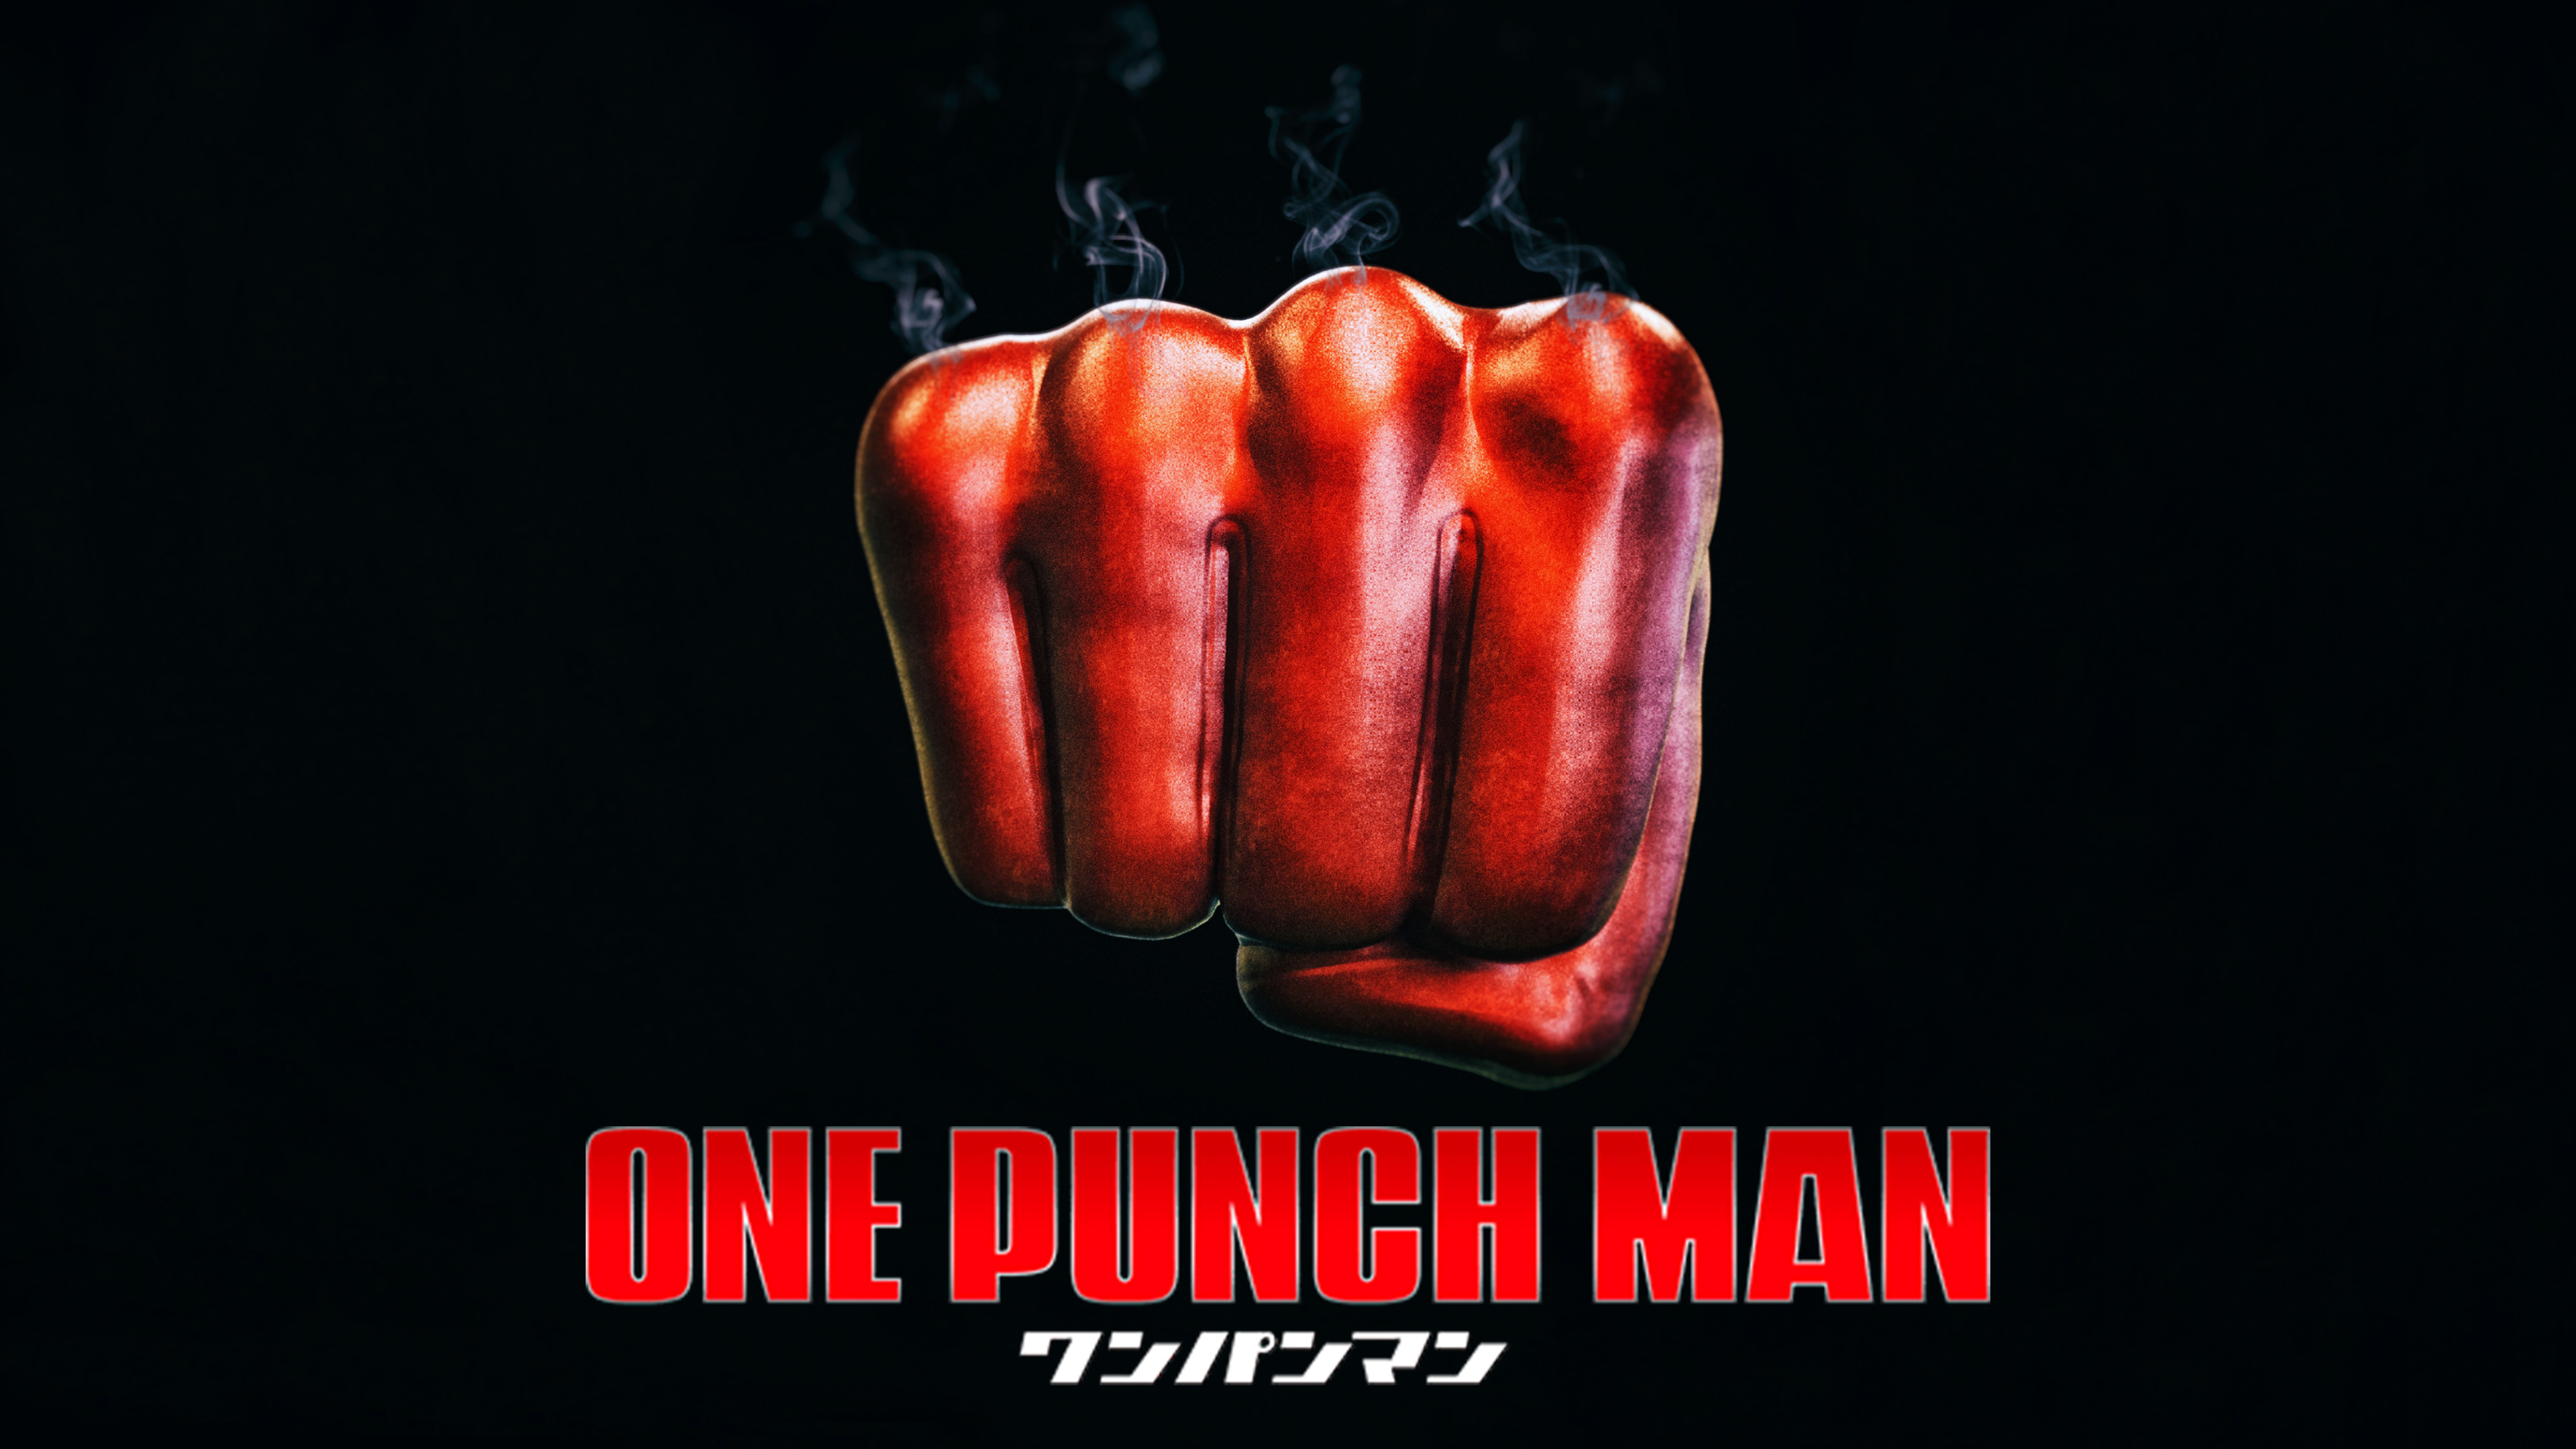 one punch man, anime cell phone wallpapers